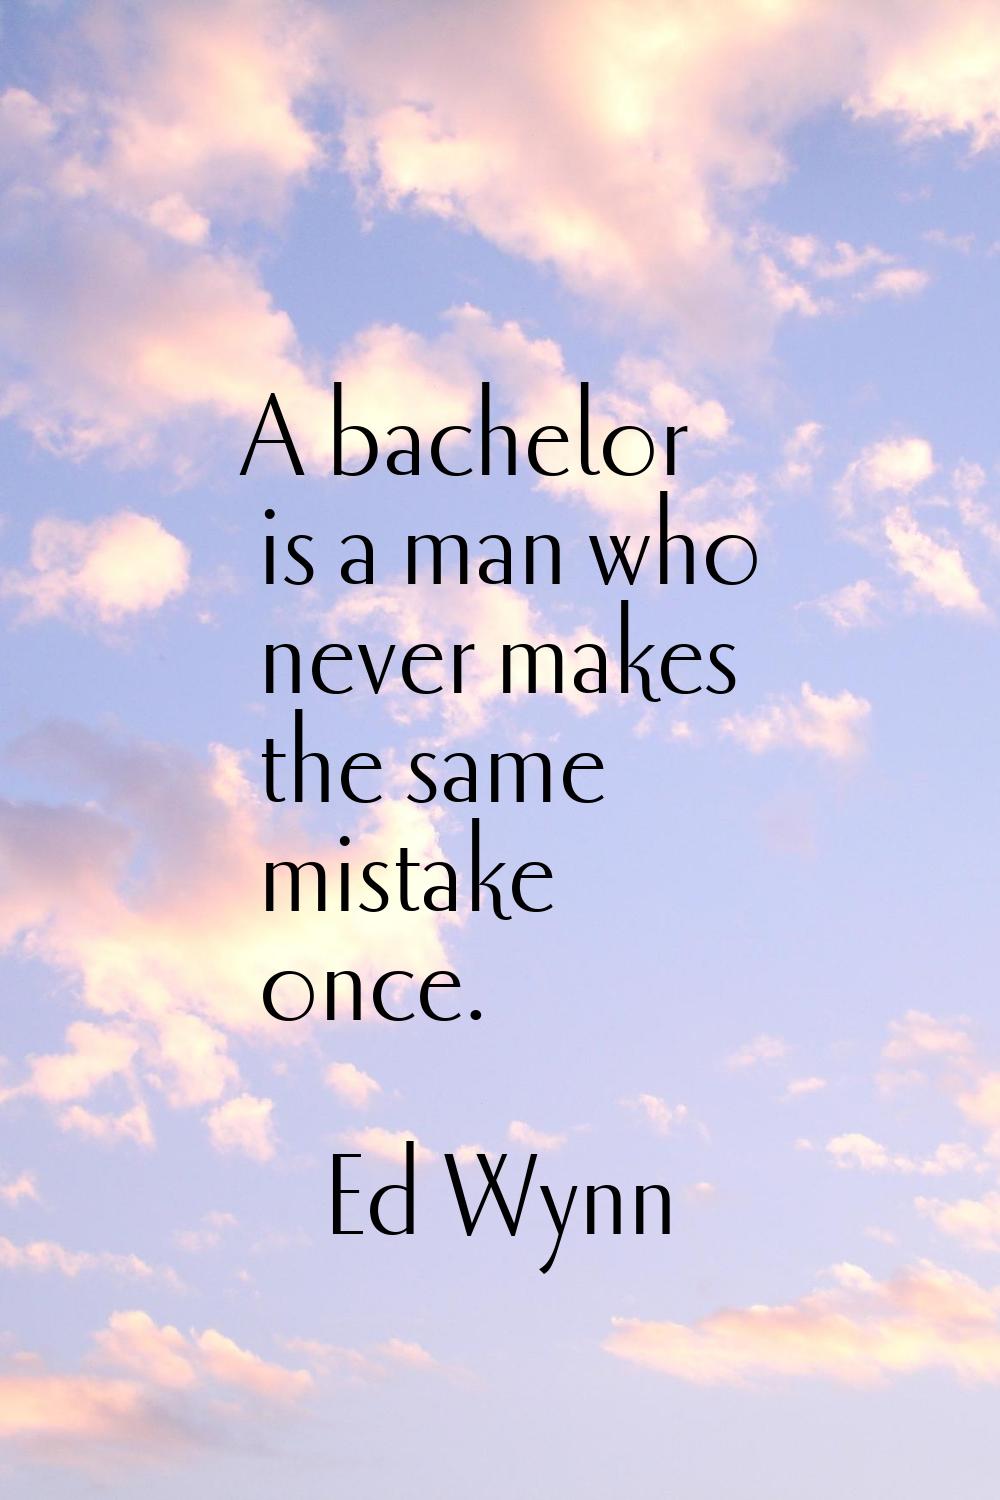 A bachelor is a man who never makes the same mistake once.